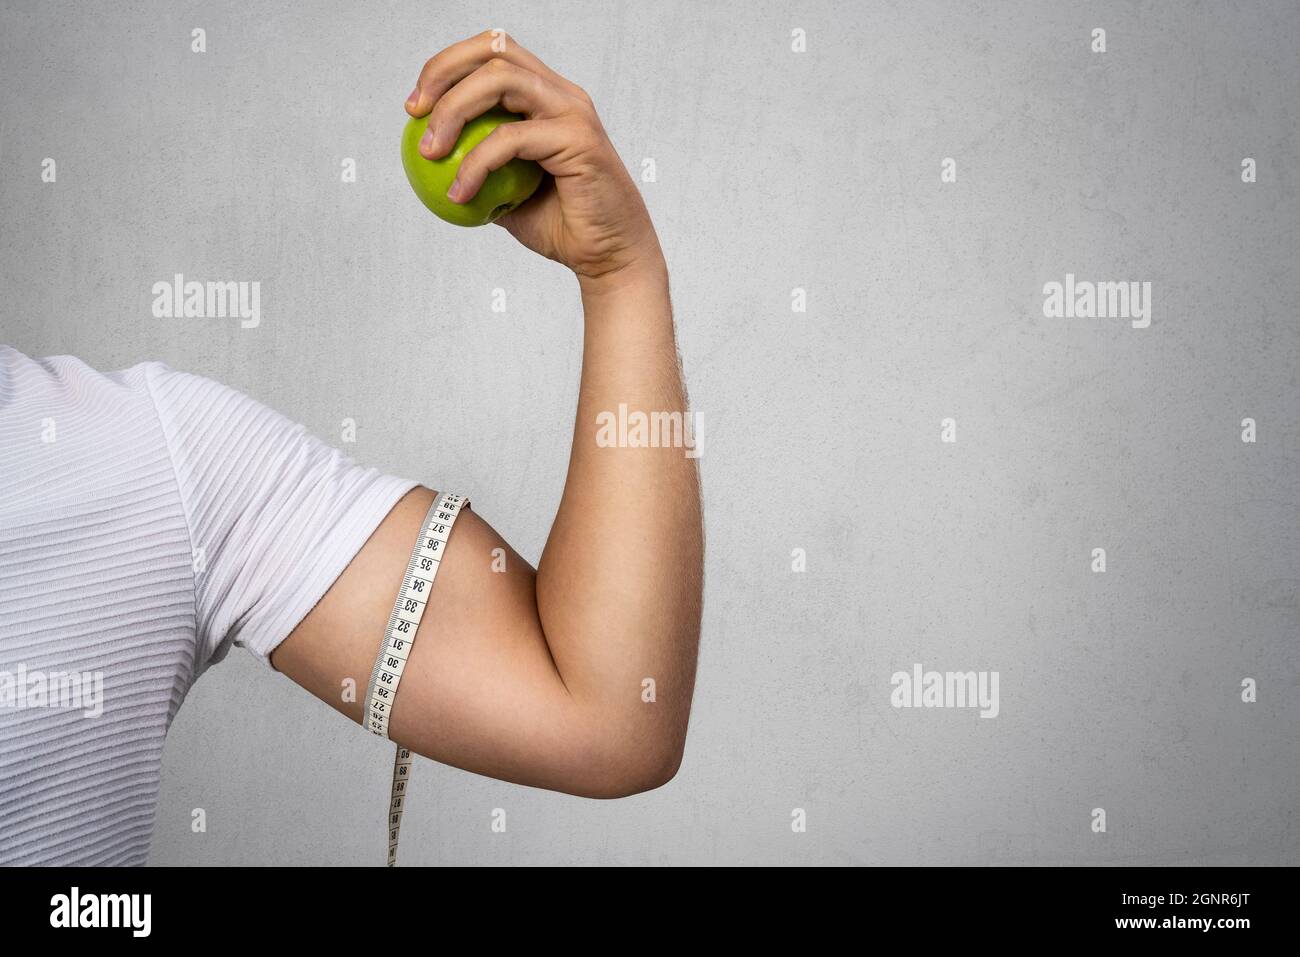 https://c8.alamy.com/comp/2GNR6JT/young-athletic-man-holding-an-apple-and-shows-his-biceps-sport-and-diet-for-healthy-life-high-quality-photo-2GNR6JT.jpg